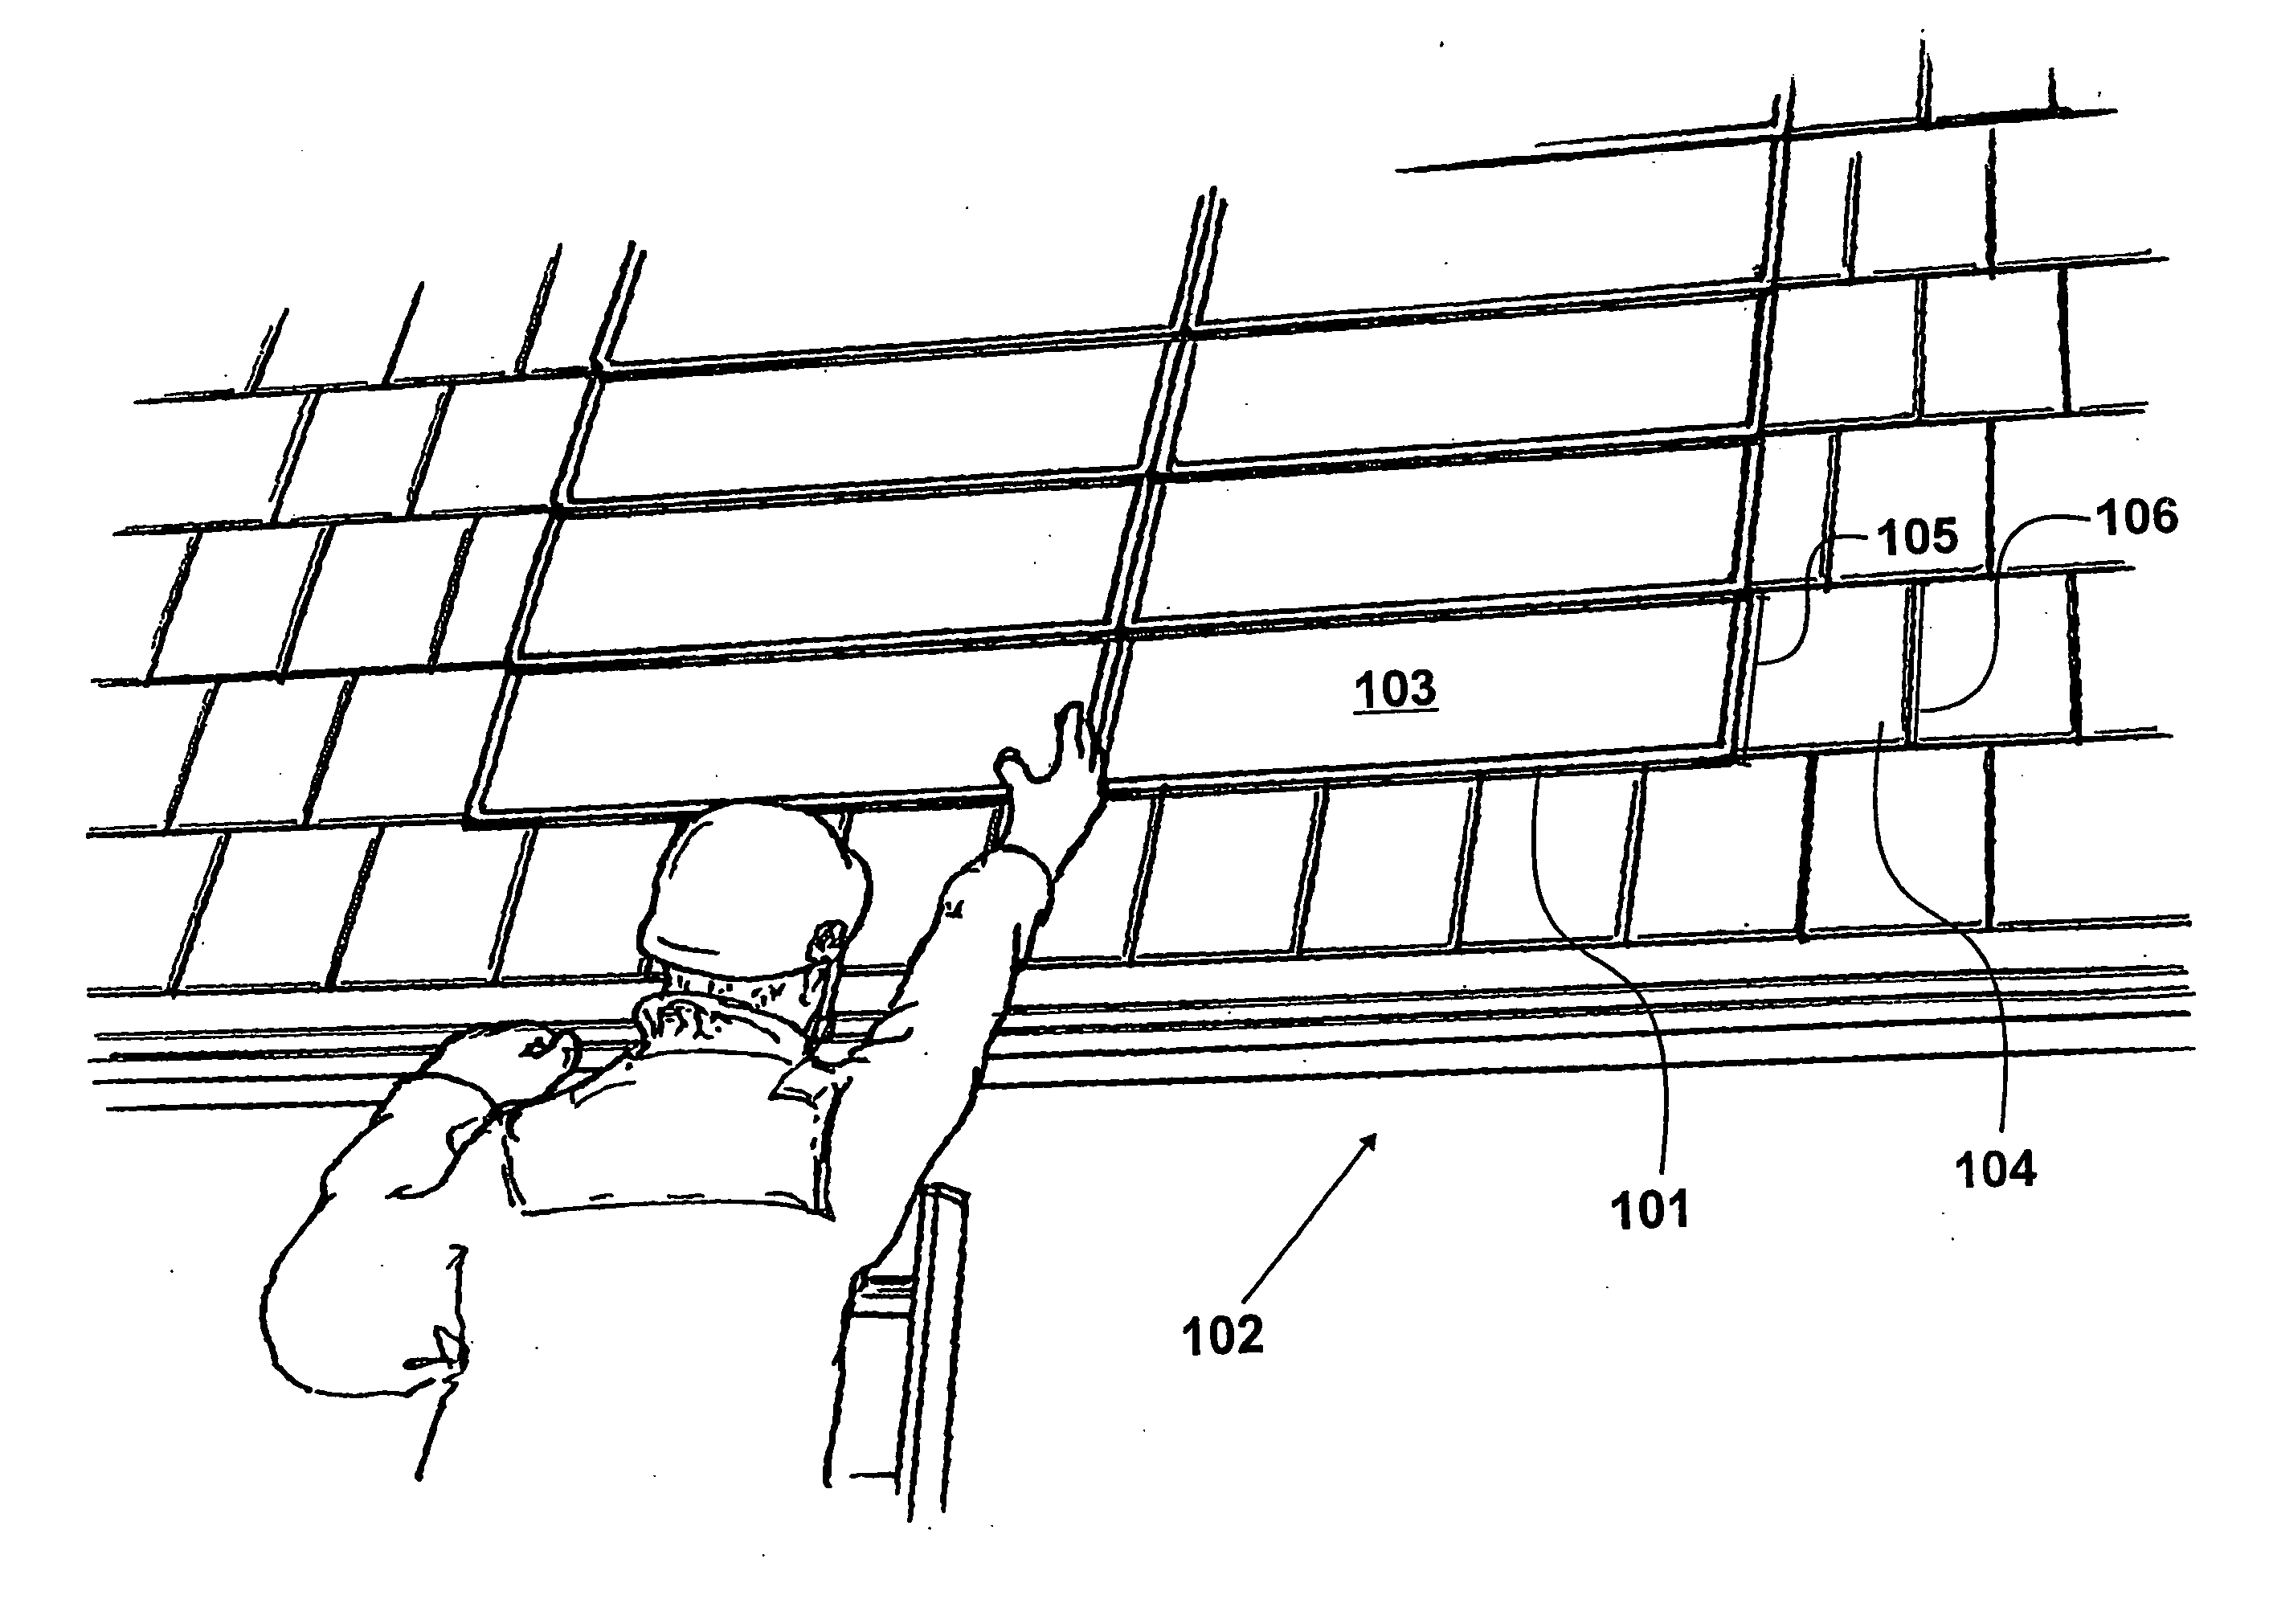 Support apparatus for supporting a solar energy collection device